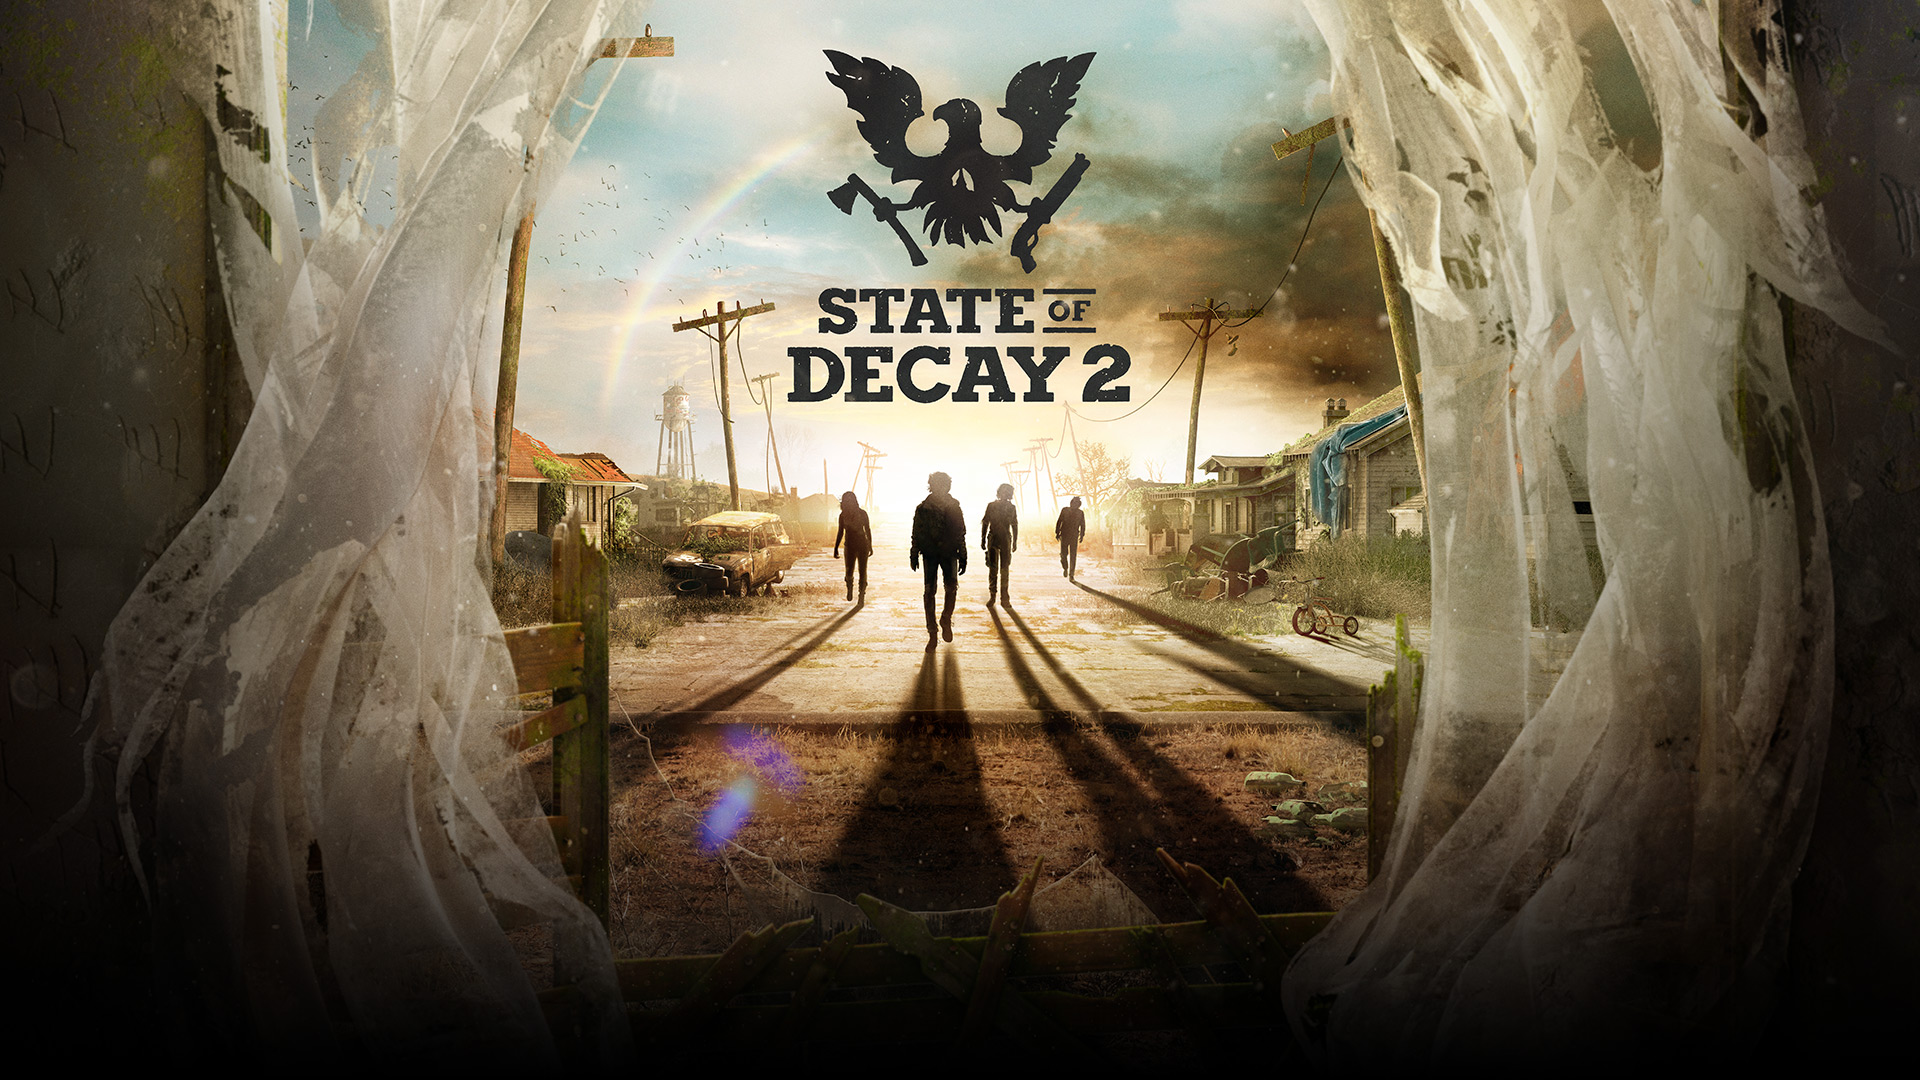 download state of decay 3 release